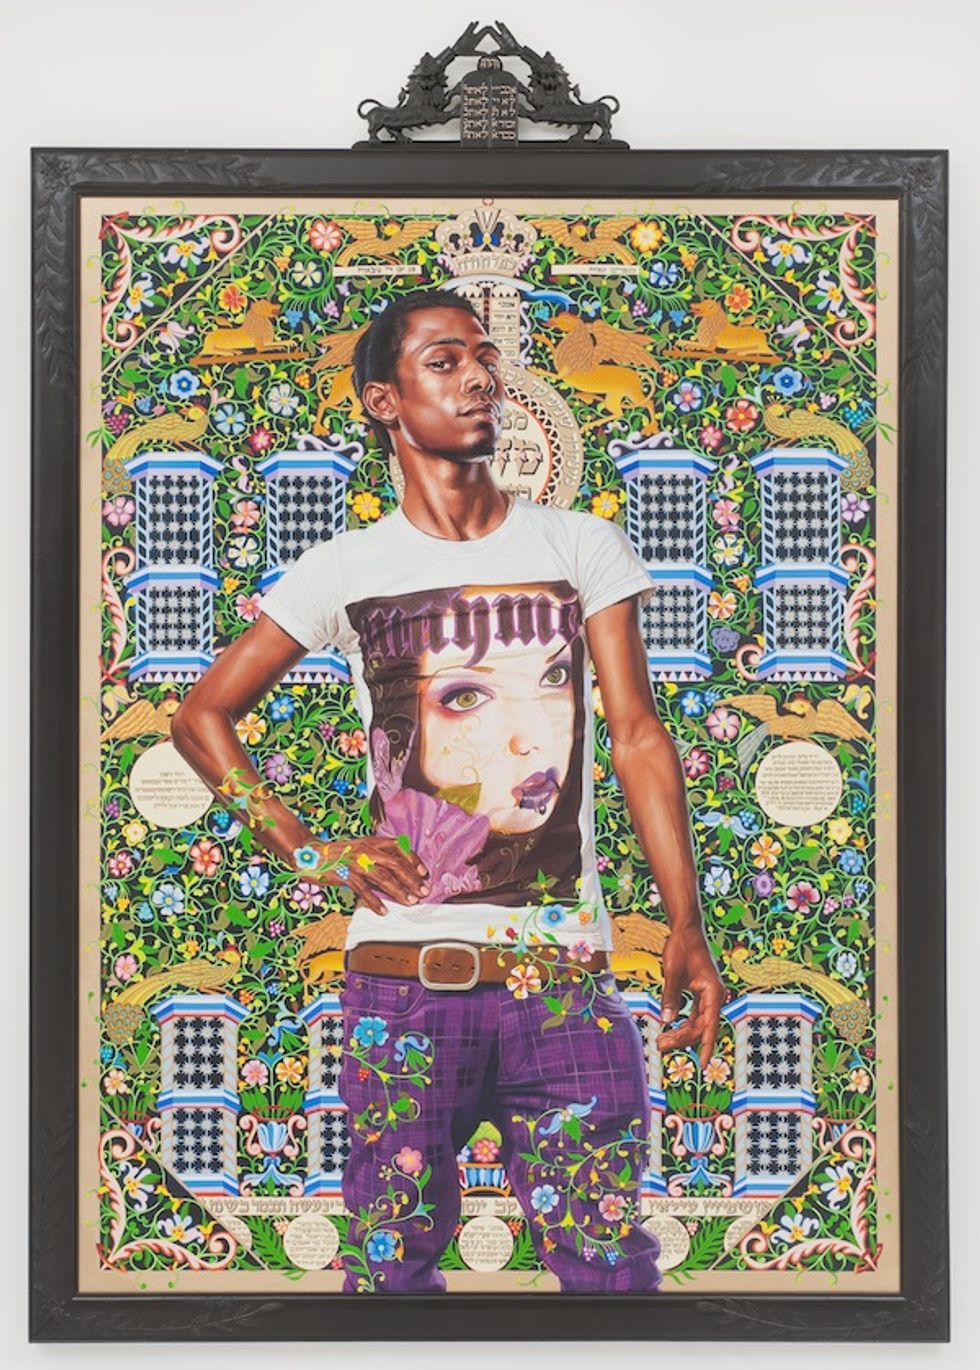 The Contemporary Jewish Museum Shows Kehinde Wiley's Latest Series of Grand Portraiture